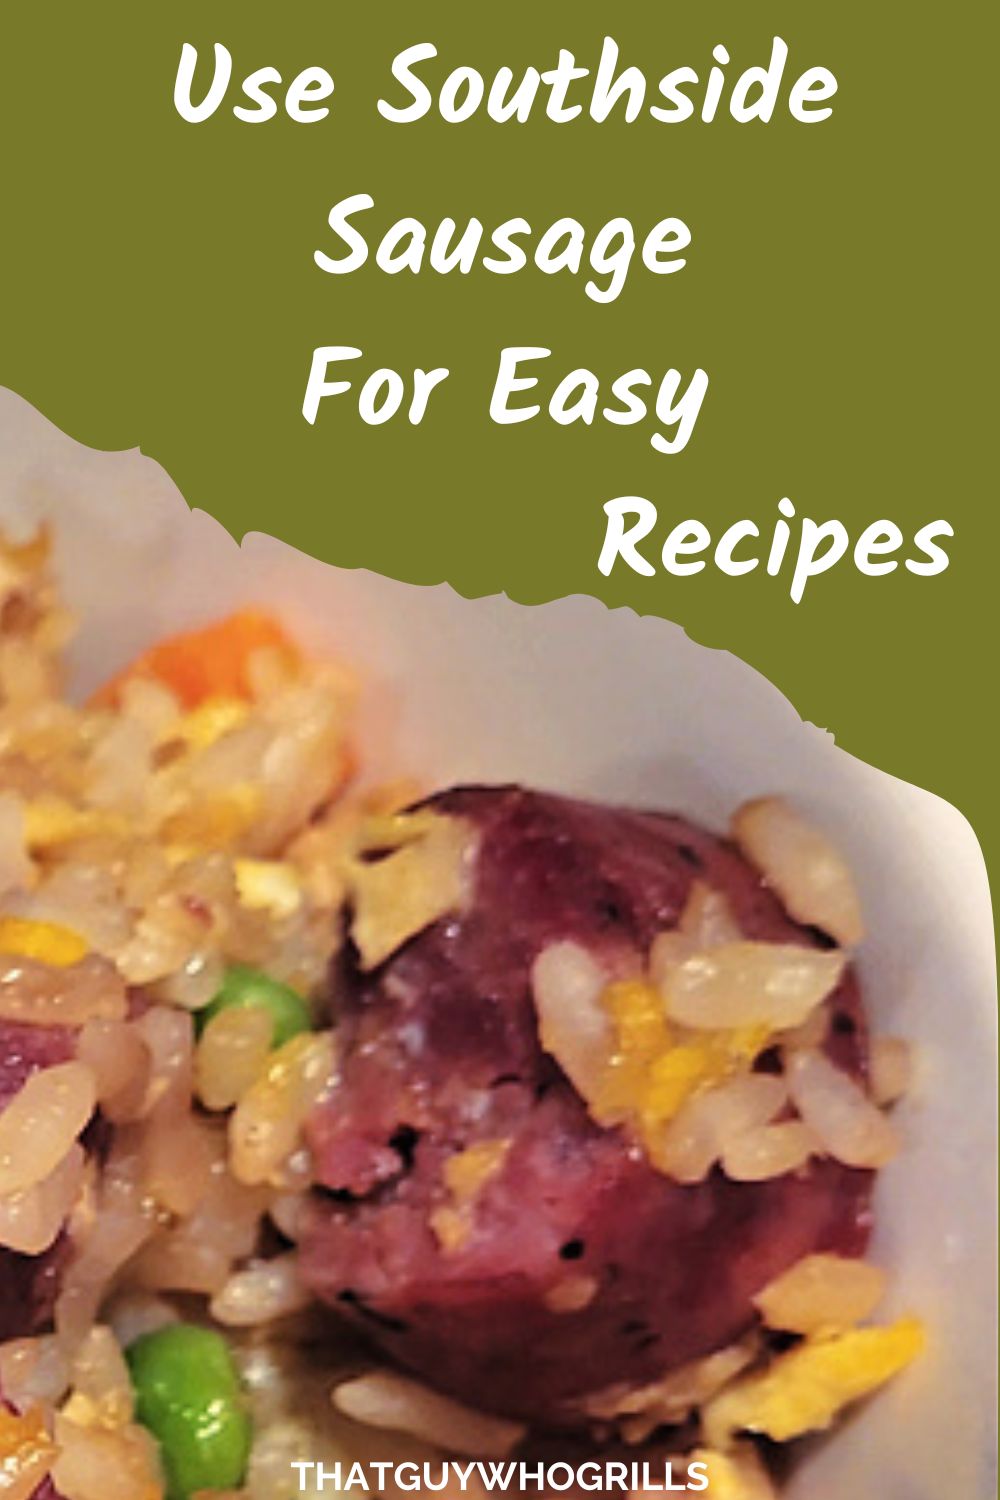 Use Southside Sausage  For Easy Recipes